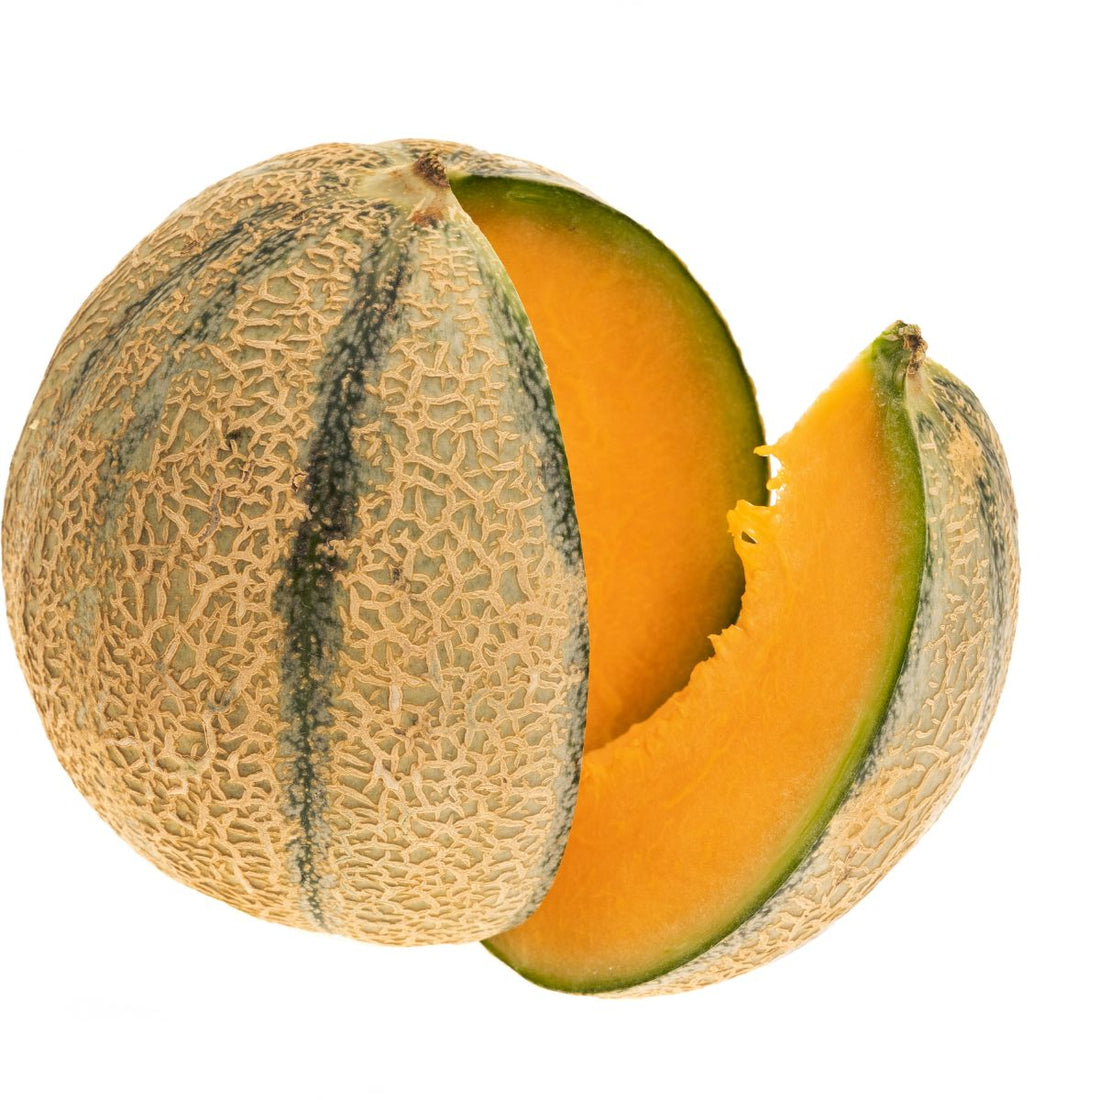 How to Cut a Cantaloupe Melon a Step-by-Step Guide